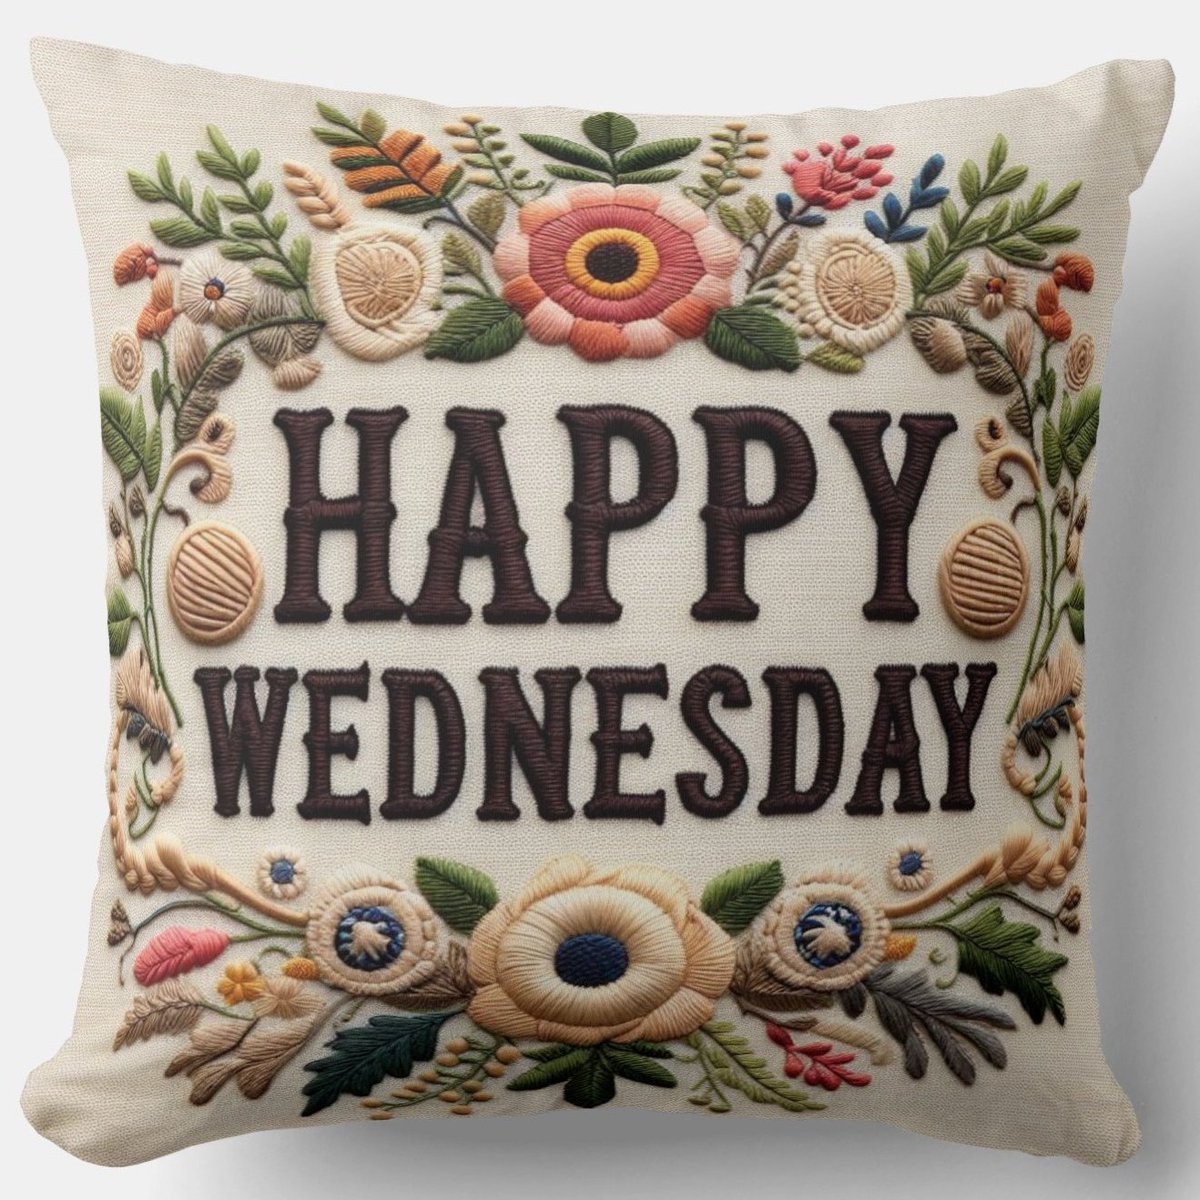 Happy Wednesday Pillow zazzle.com/a_floral_wreat… This #pillow is perfect for adding a cheerful touch to any space #WednesdayMotivation #Wednesdayvibe #wednesdaythought #WednesdayFeeling #HumpDay #giftformom #pillows #HappyWednesday #MidWeek #HappyHumpDay #giftshop #RoseWednesday